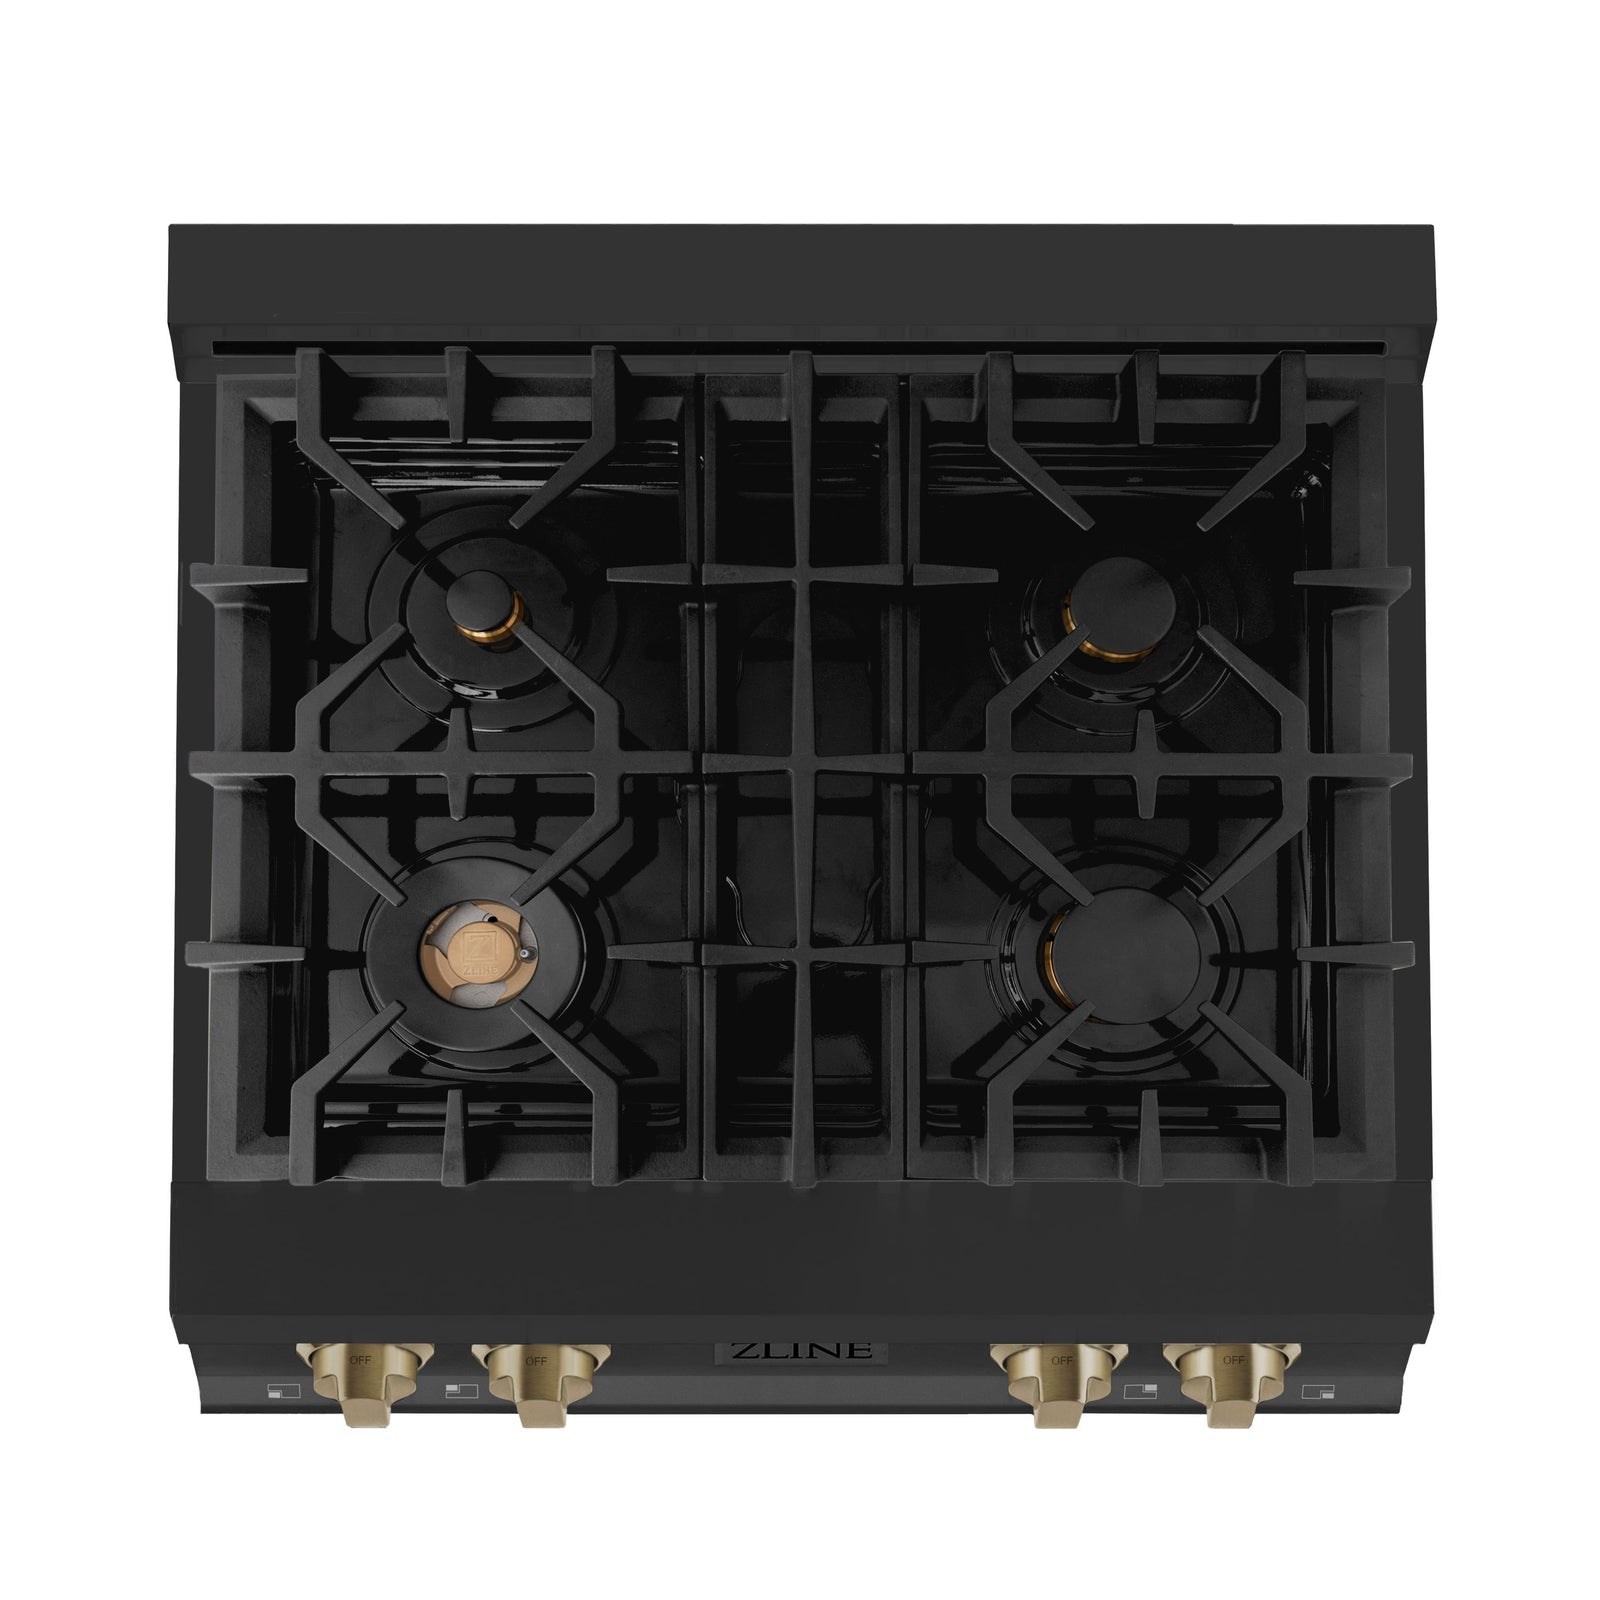 ZLINE Autograph Edition 30 In. Rangetop with 4 Gas Burners in Black Stainless Steel and Champagne Bronze Accents, RTBZ-30-CB - Smart Kitchen Lab